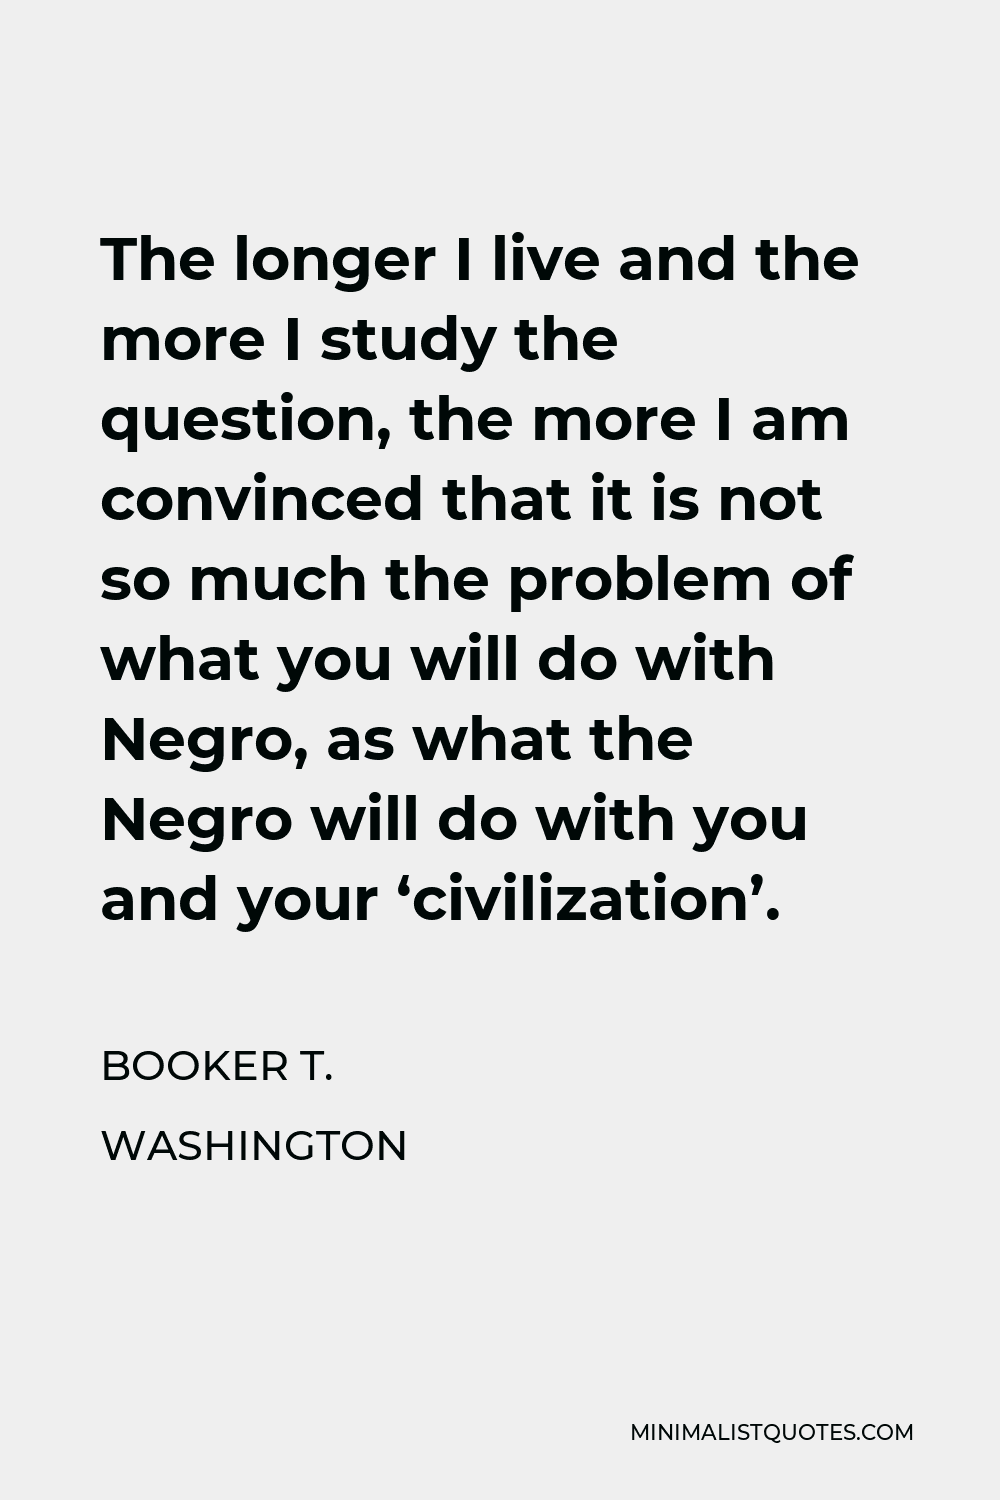 Booker T. Washington Quote - The longer I live and the more I study the question, the more I am convinced that it is not so much the problem of what you will do with Negro, as what the Negro will do with you and your ‘civilization’.